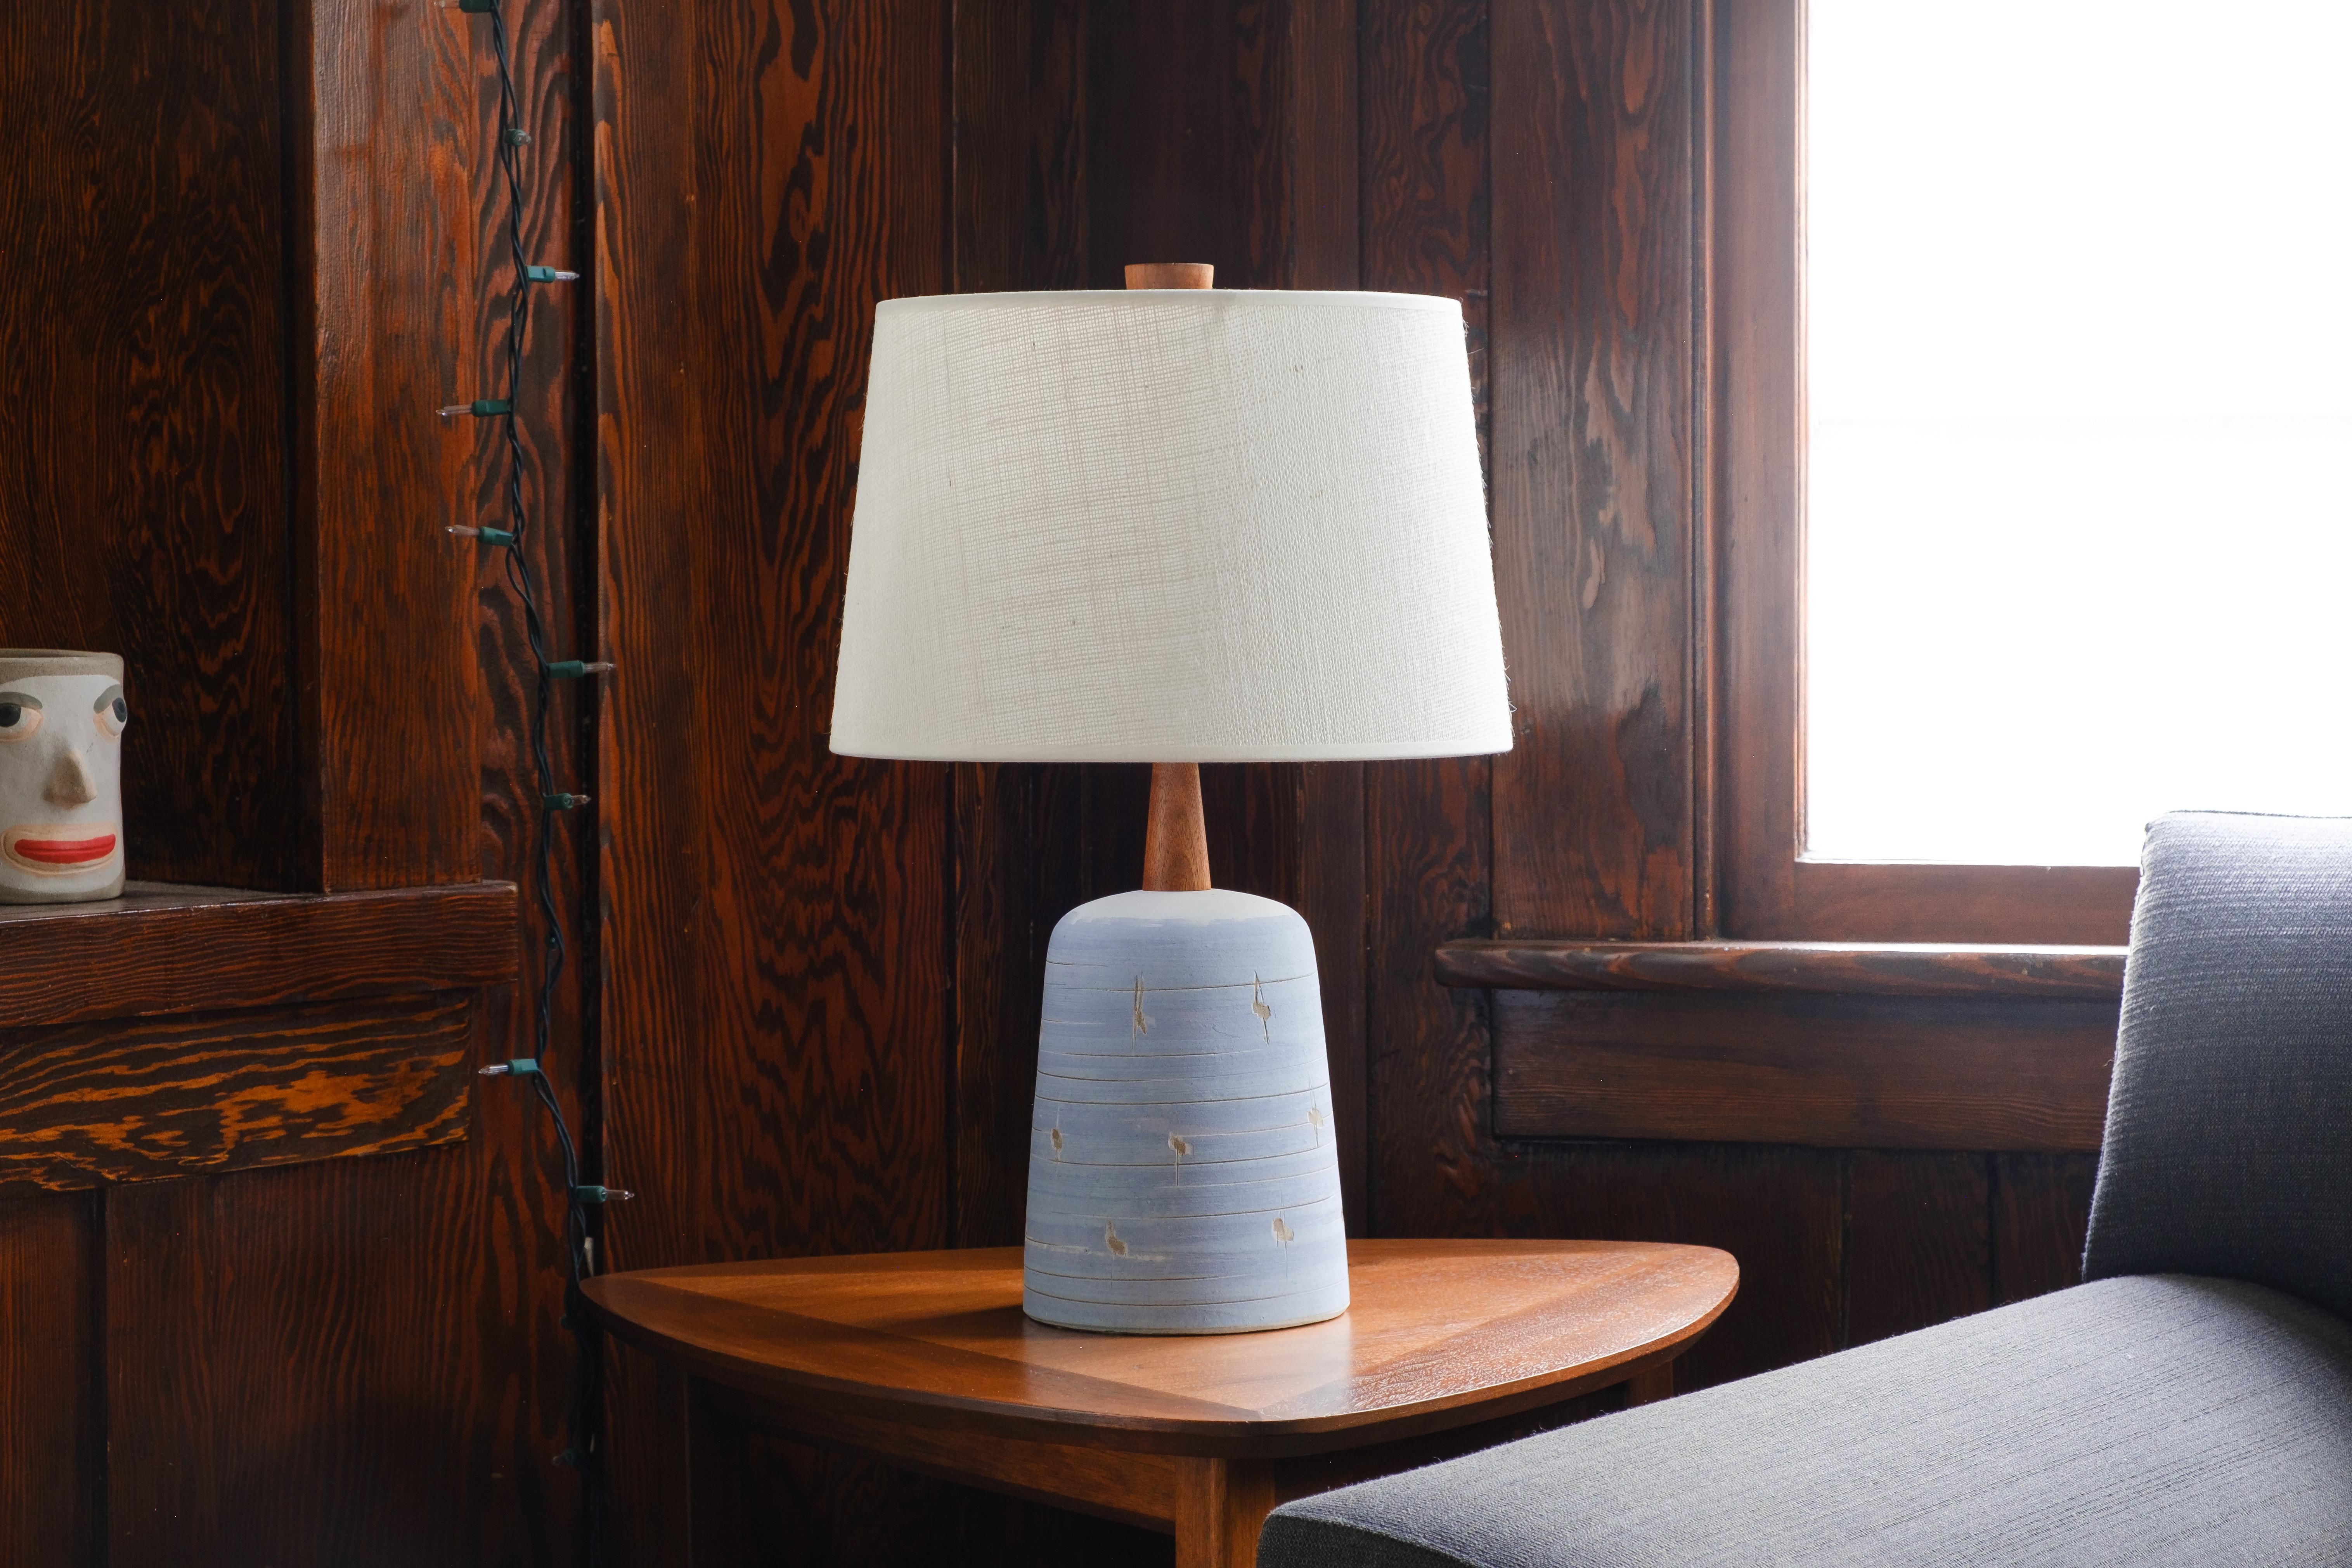 WHAT IS IT?
—
These signed Martz #56 lamps come in a flat, white slip with a horizontal swirl stripes of a blue slip. The body is further decorated with a repeating pattern of horizontal incised swirls and 